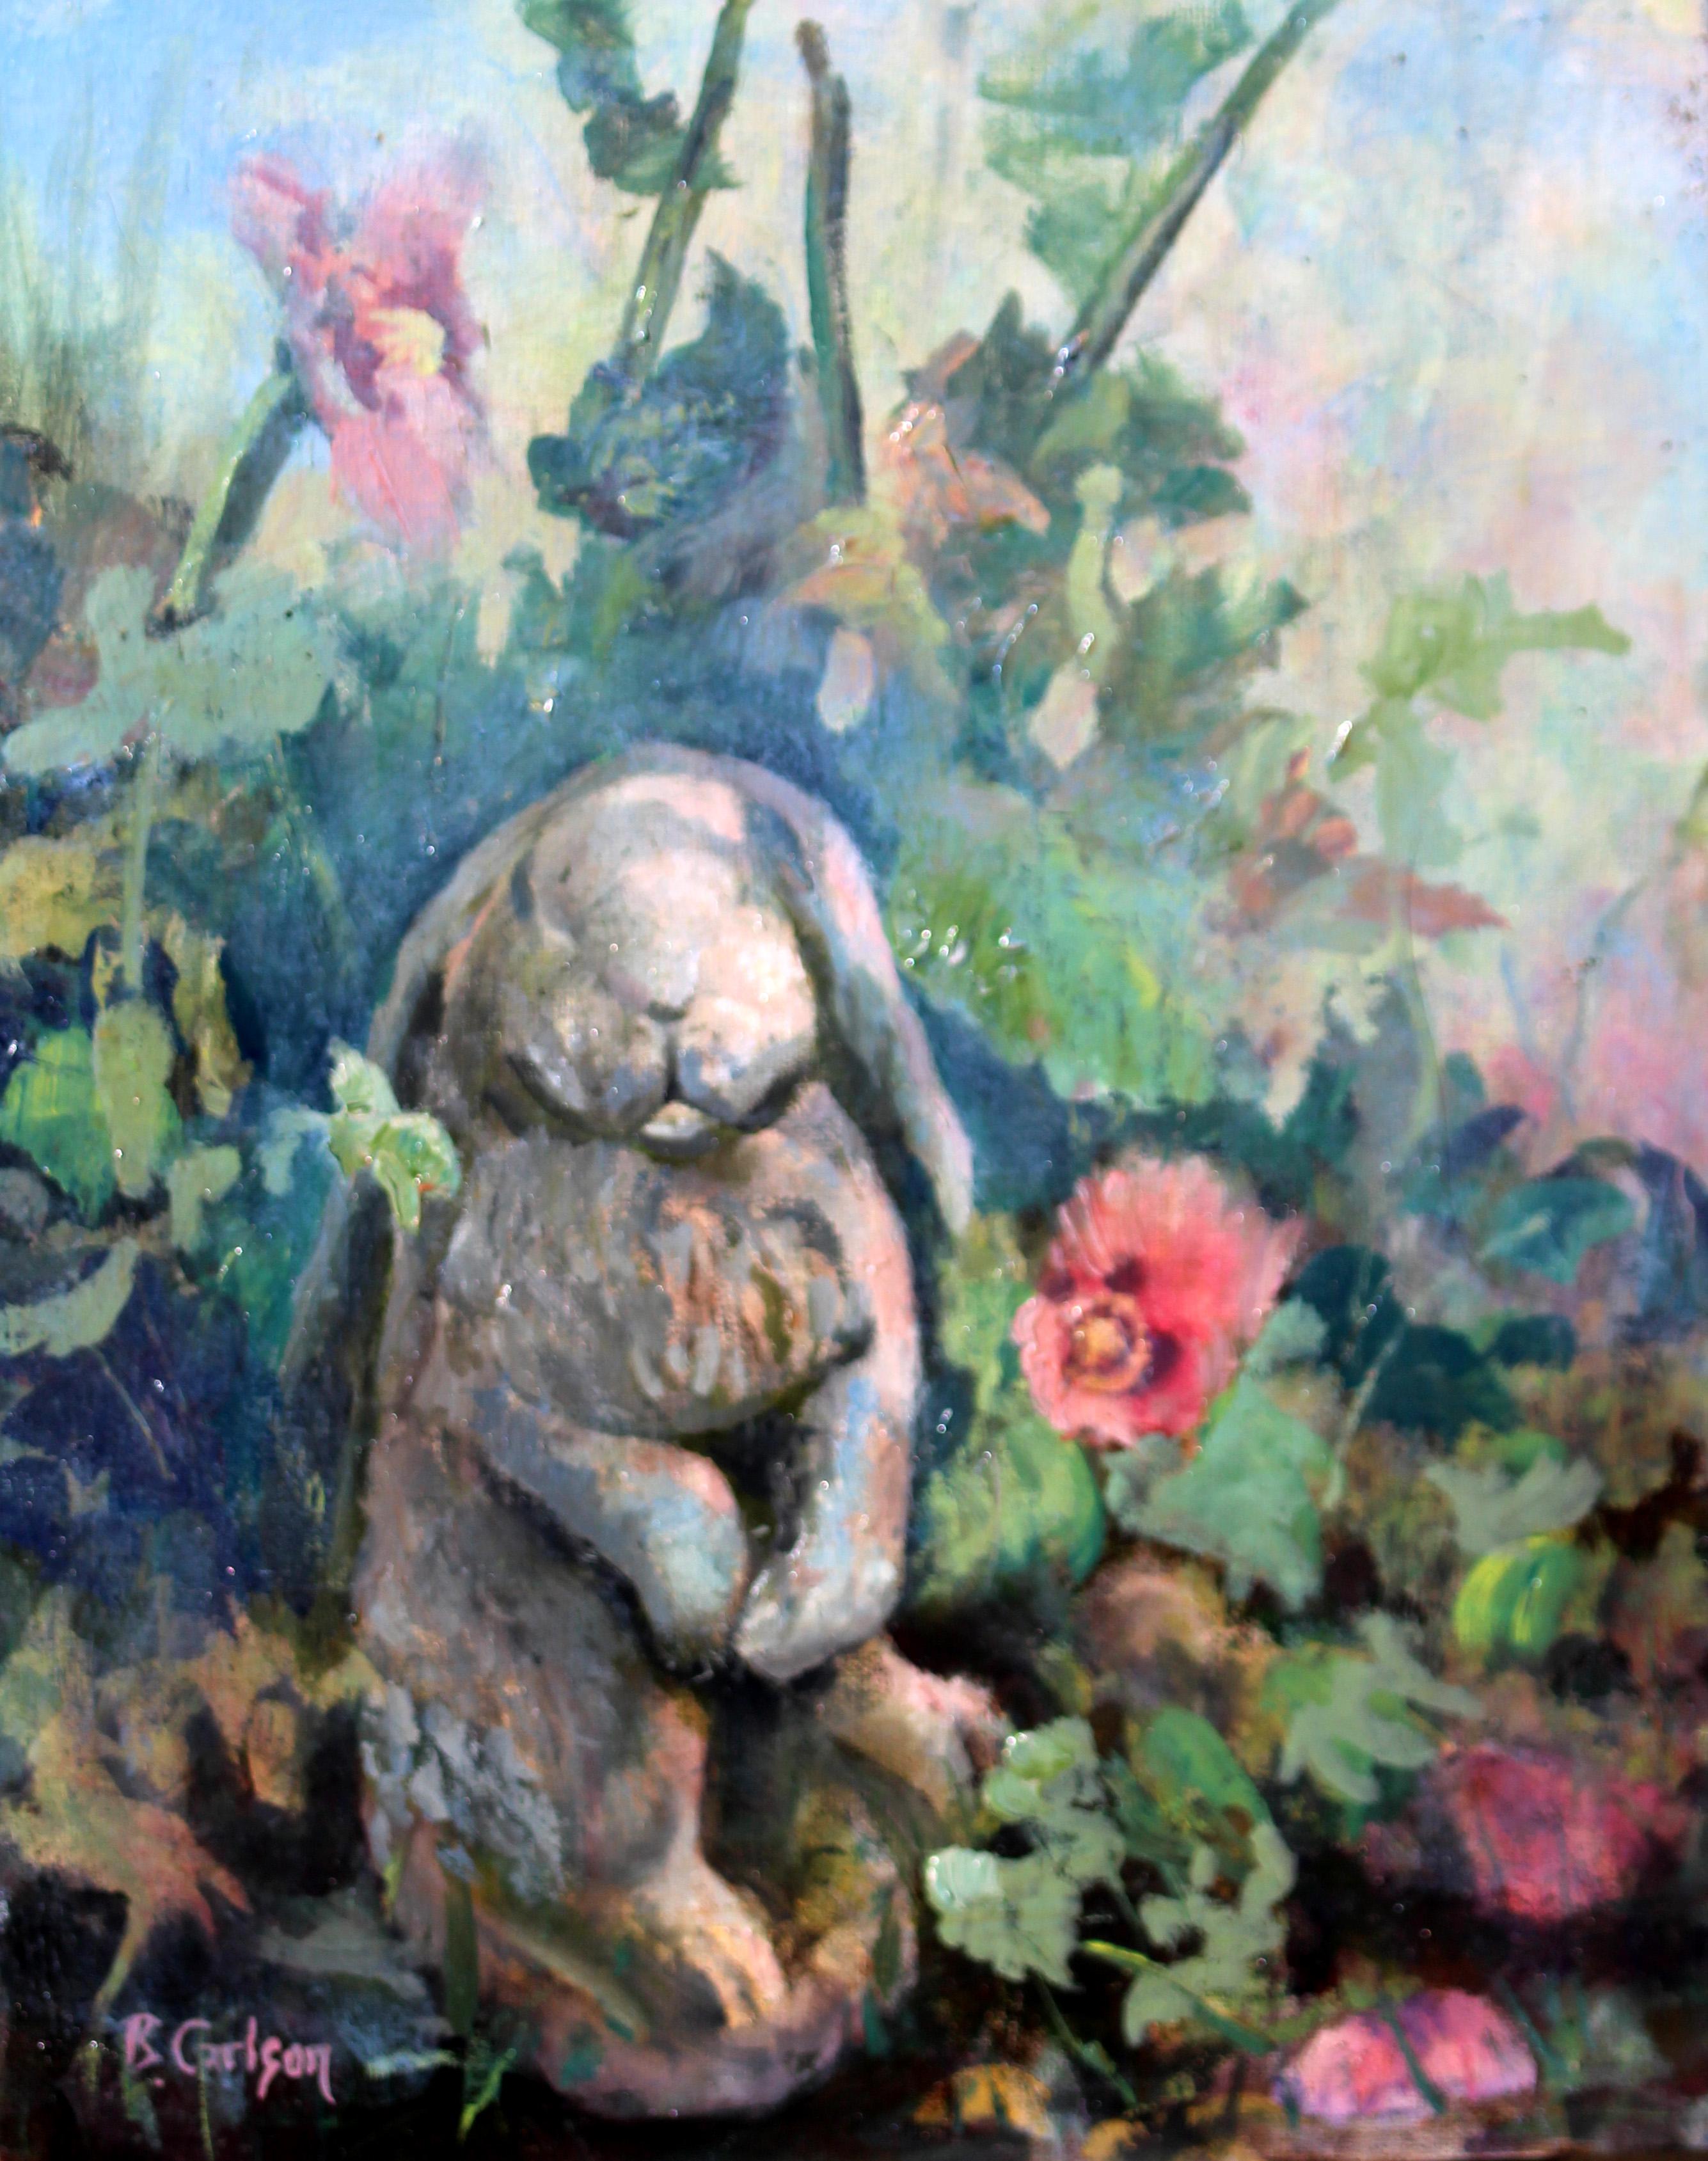 Beth Carlson Landscape Painting - Whimsical Charming Painting of A Garden with a Bunny Statue Amid Summer Poppies